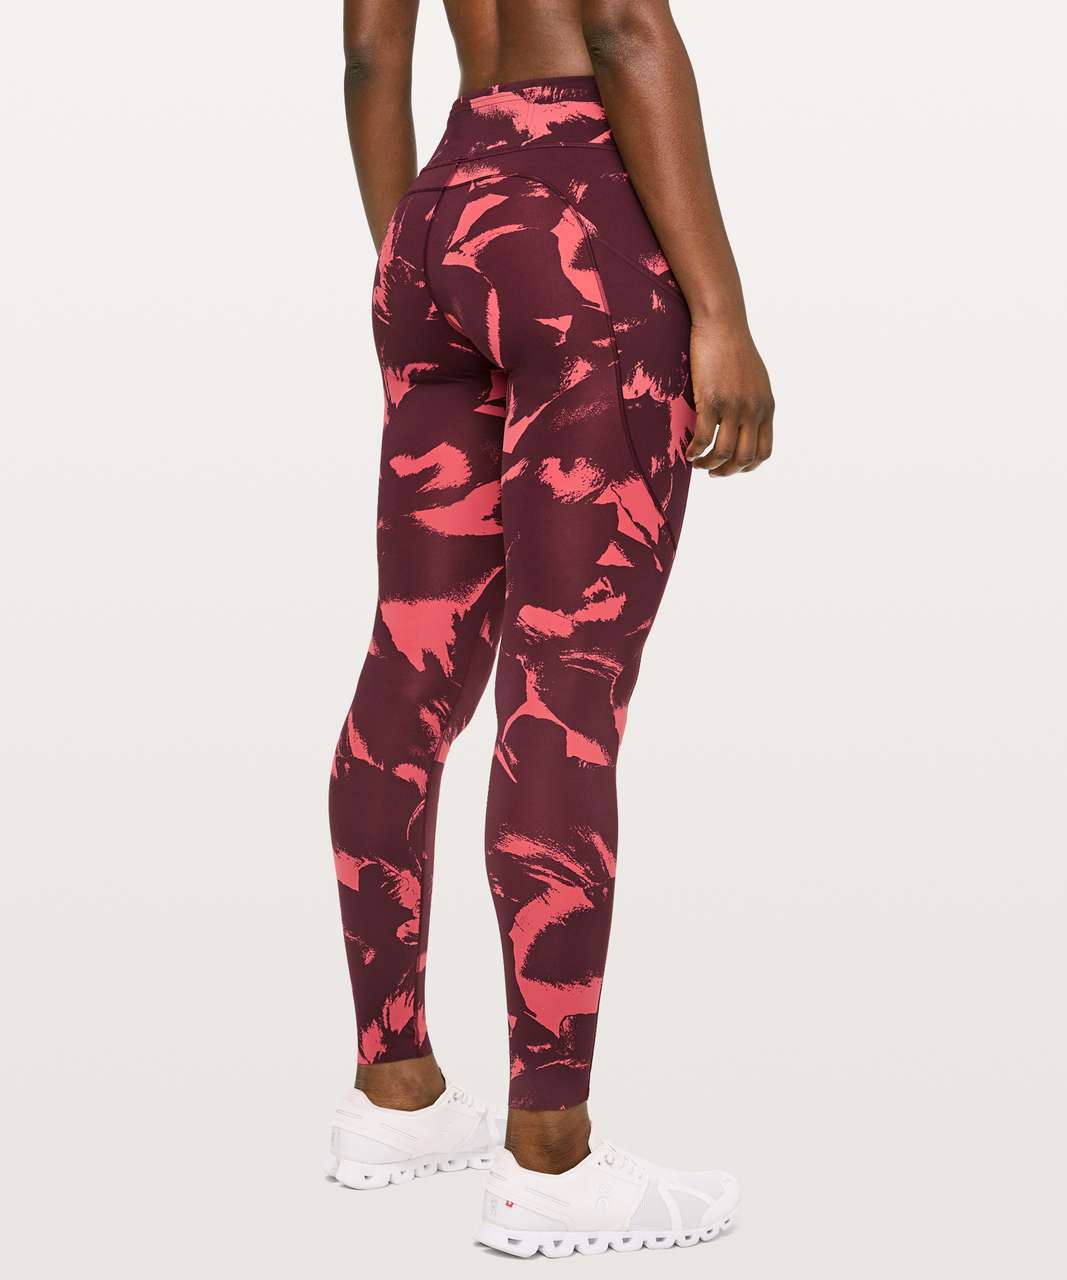 Lululemon Fast & Free Full Length Tight *Mid-Rise Non-Reflective 28" - Flower Pop Poppy Coral Deep Ruby